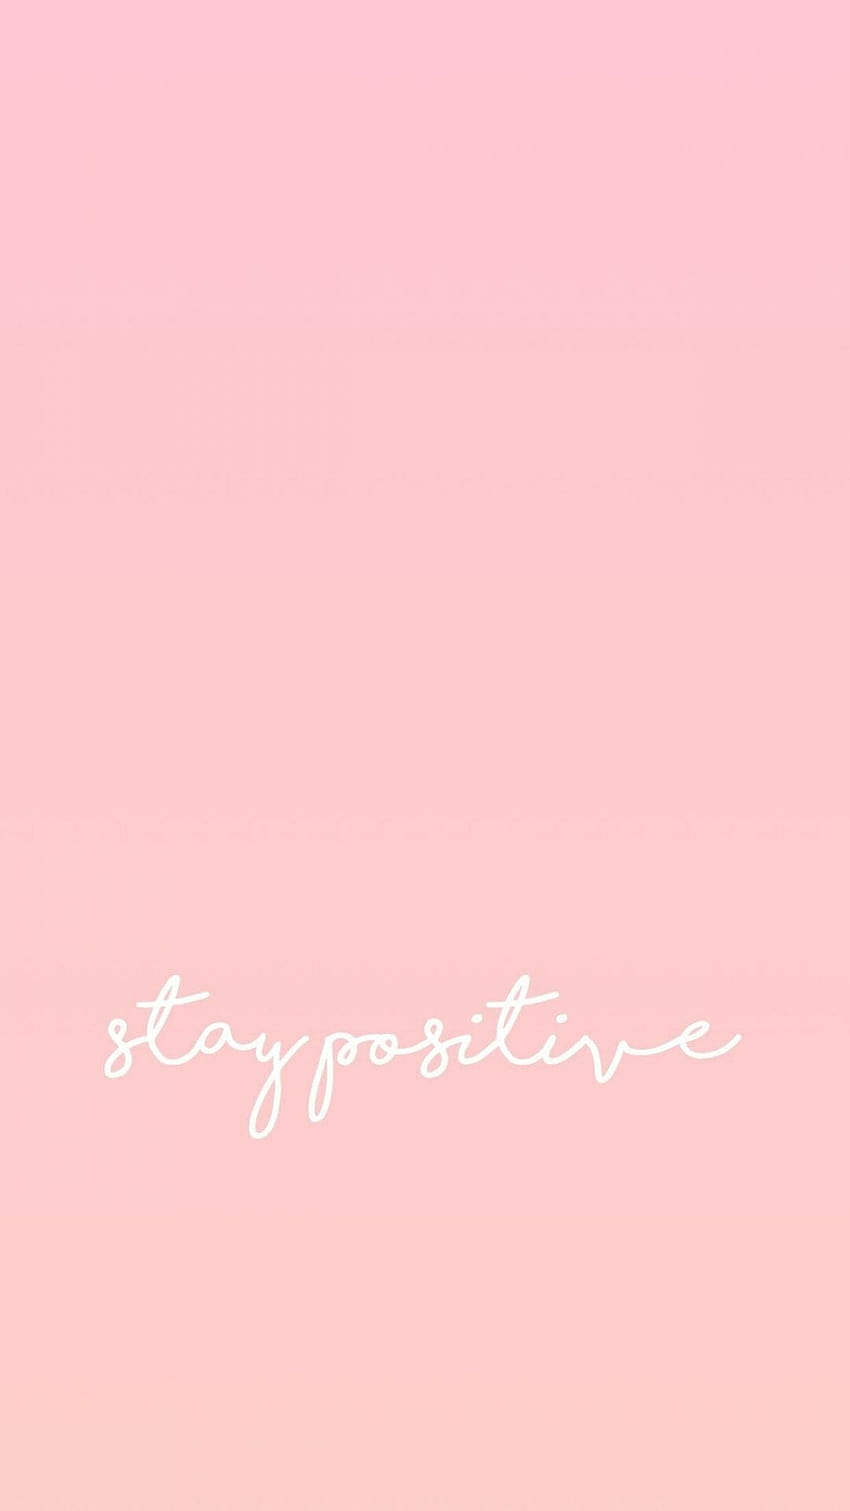 Positive Aesthetic Laptop, stay postive HD phone wallpaper